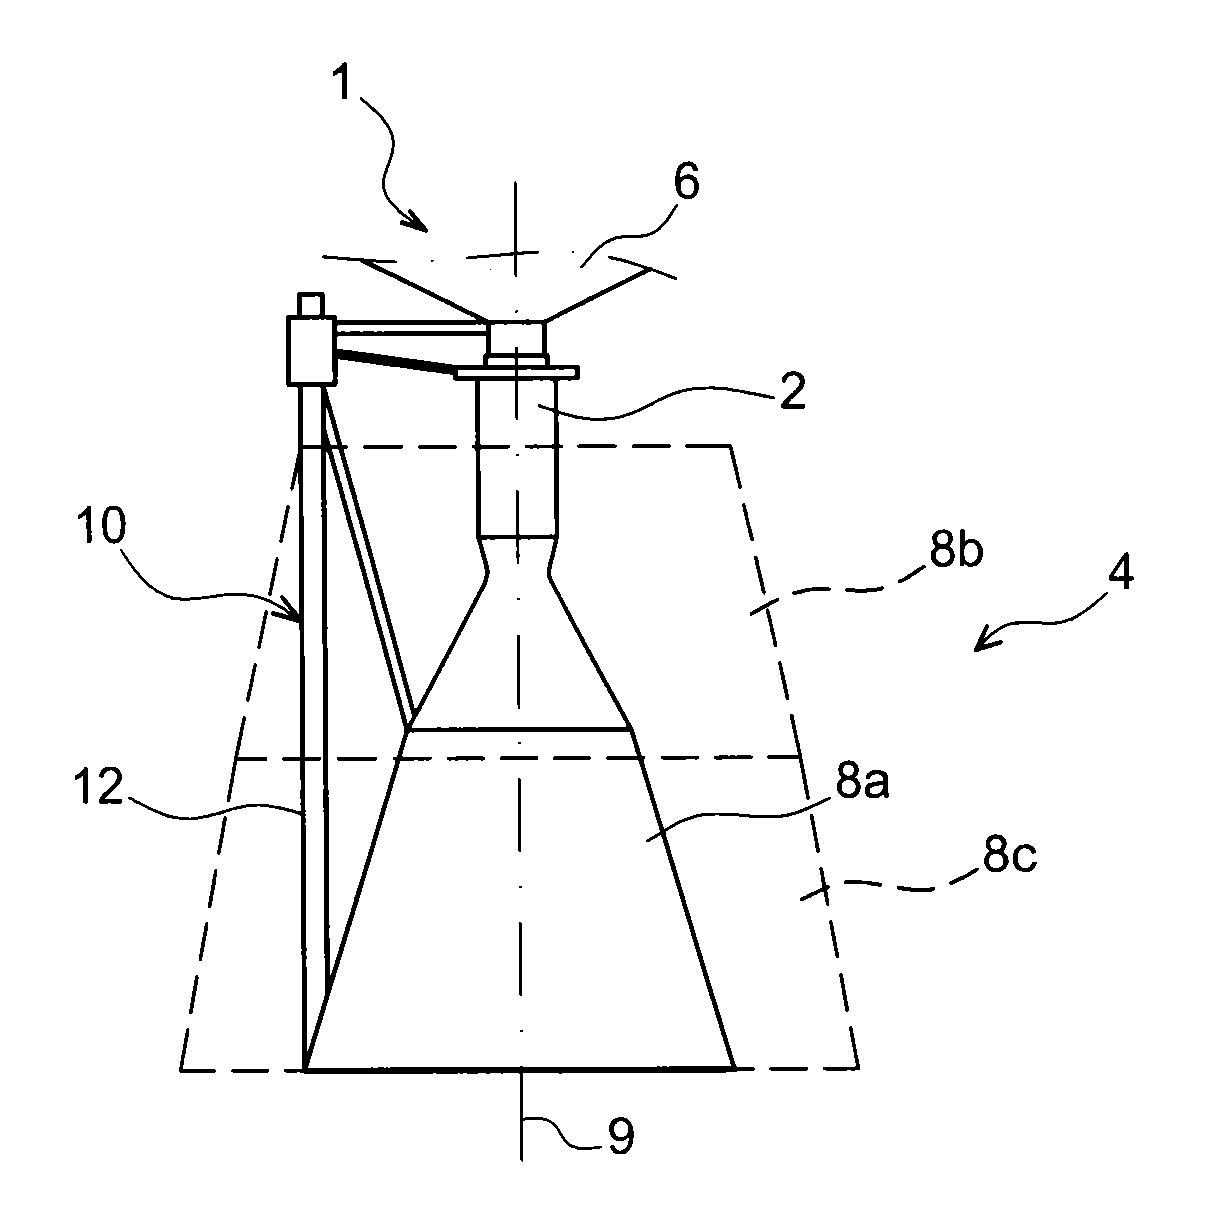 Launcher stage comprising a temporary support structure for temporarily supporting nozzle sections allowing access to the core of the engine